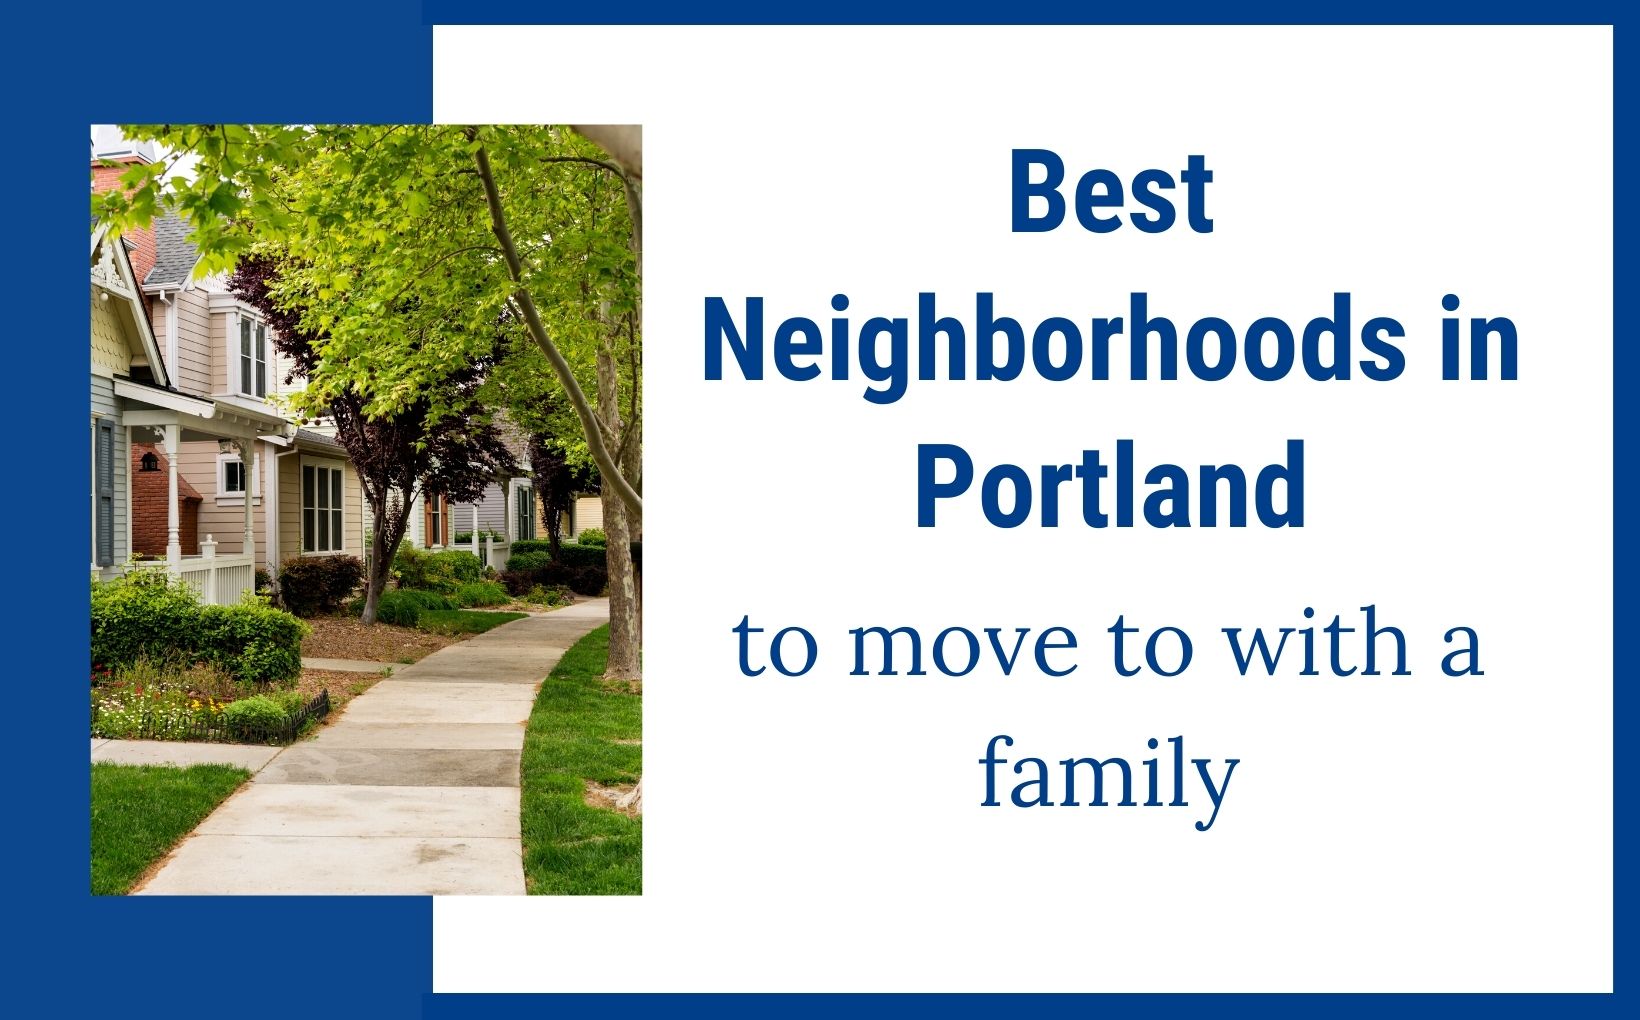 Best neighborhoods in Portland for families, Living in Portland real estate agents